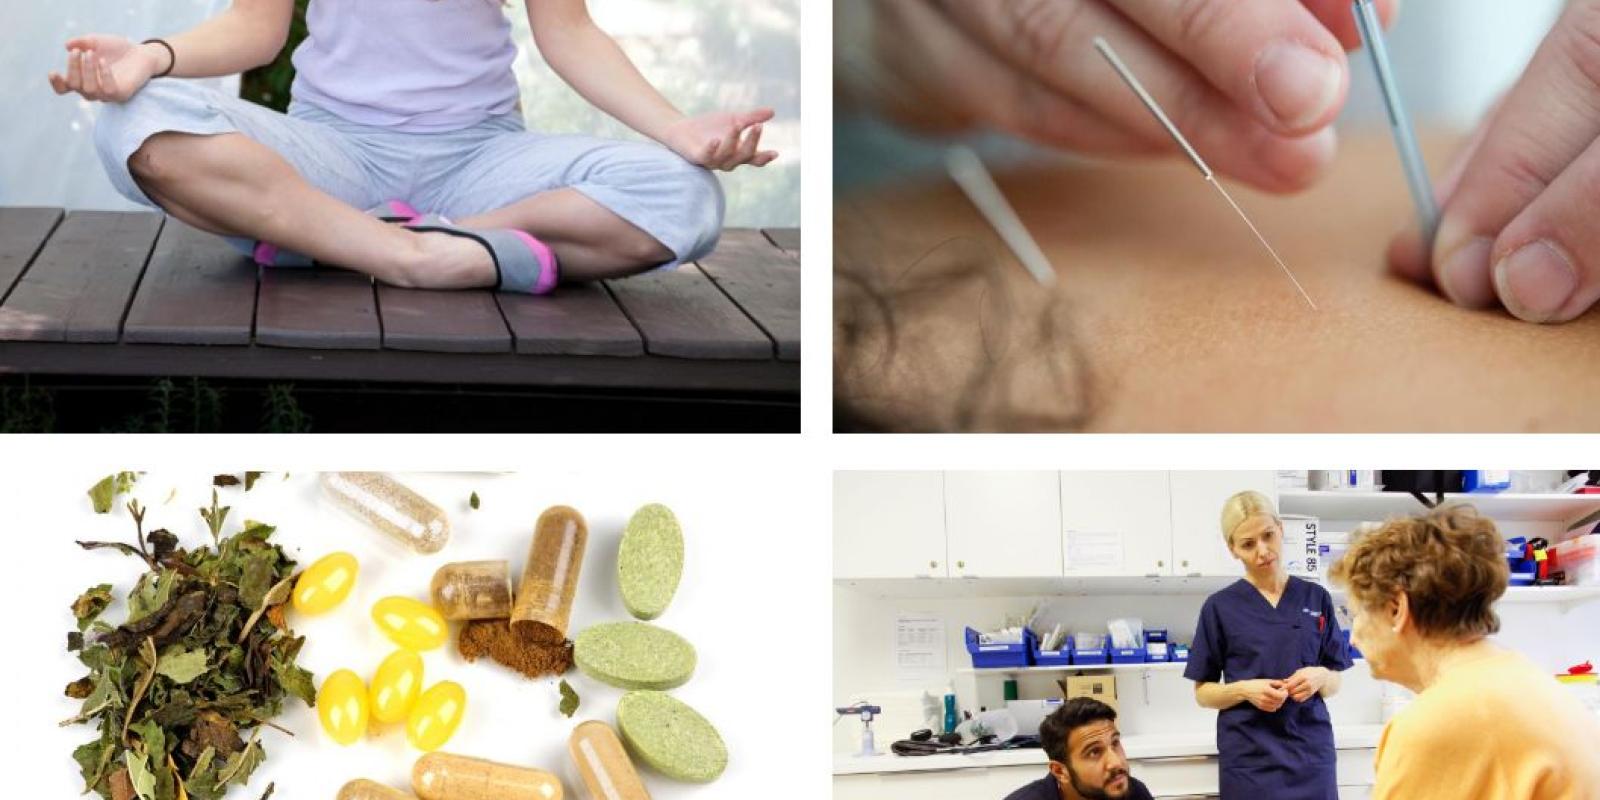 Photos showing woman meditating, herbs and pills, acupuncture needles, and a patient consulting healthcare professionals